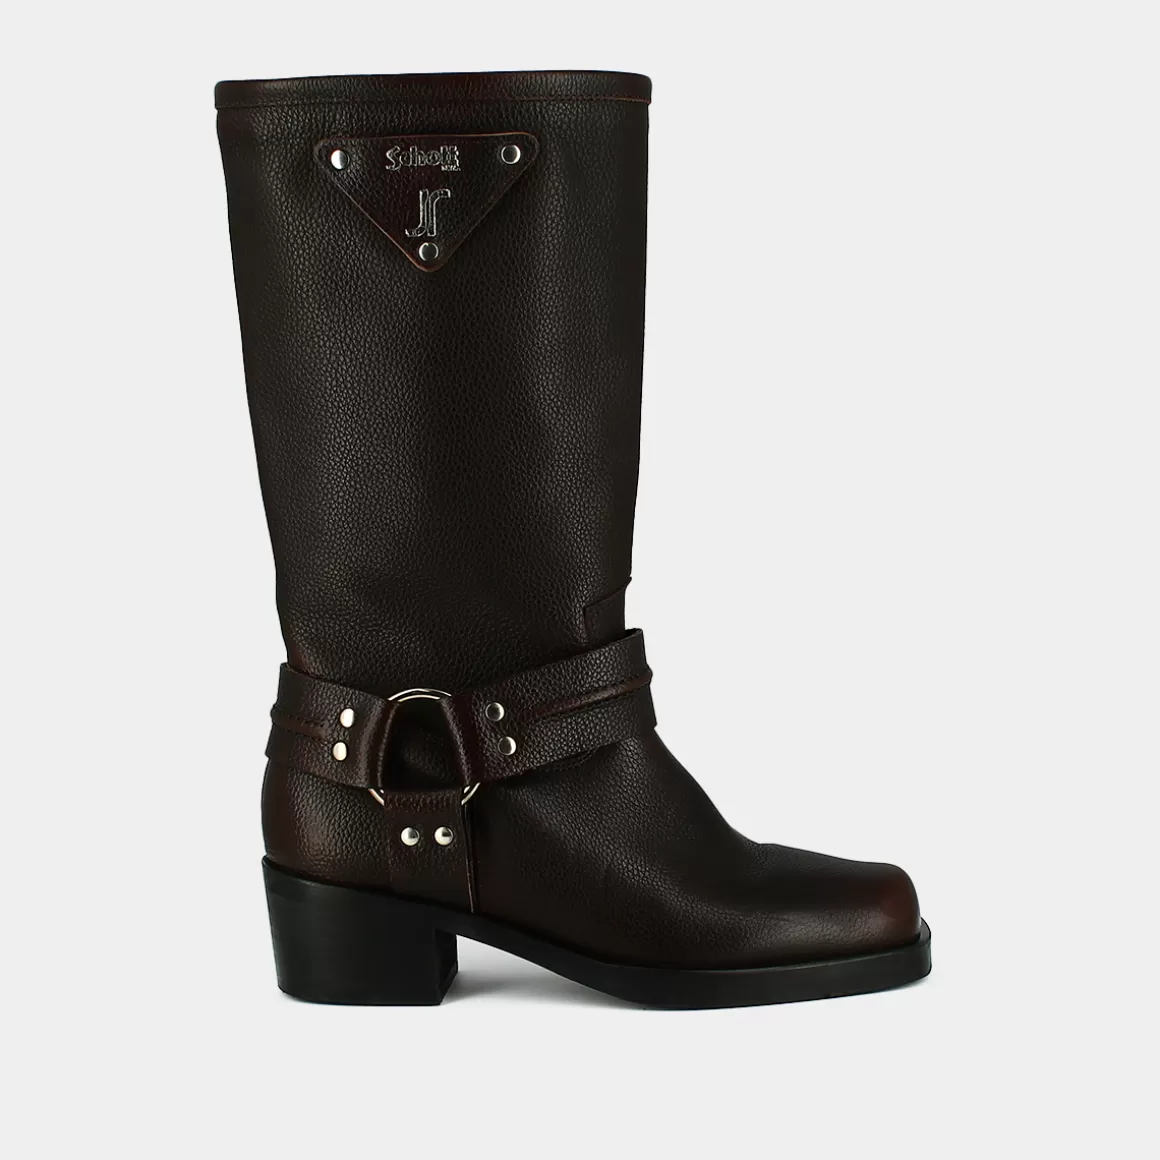 Biker boots with silver buckles and square toes - x Schott<Jonak Cheap